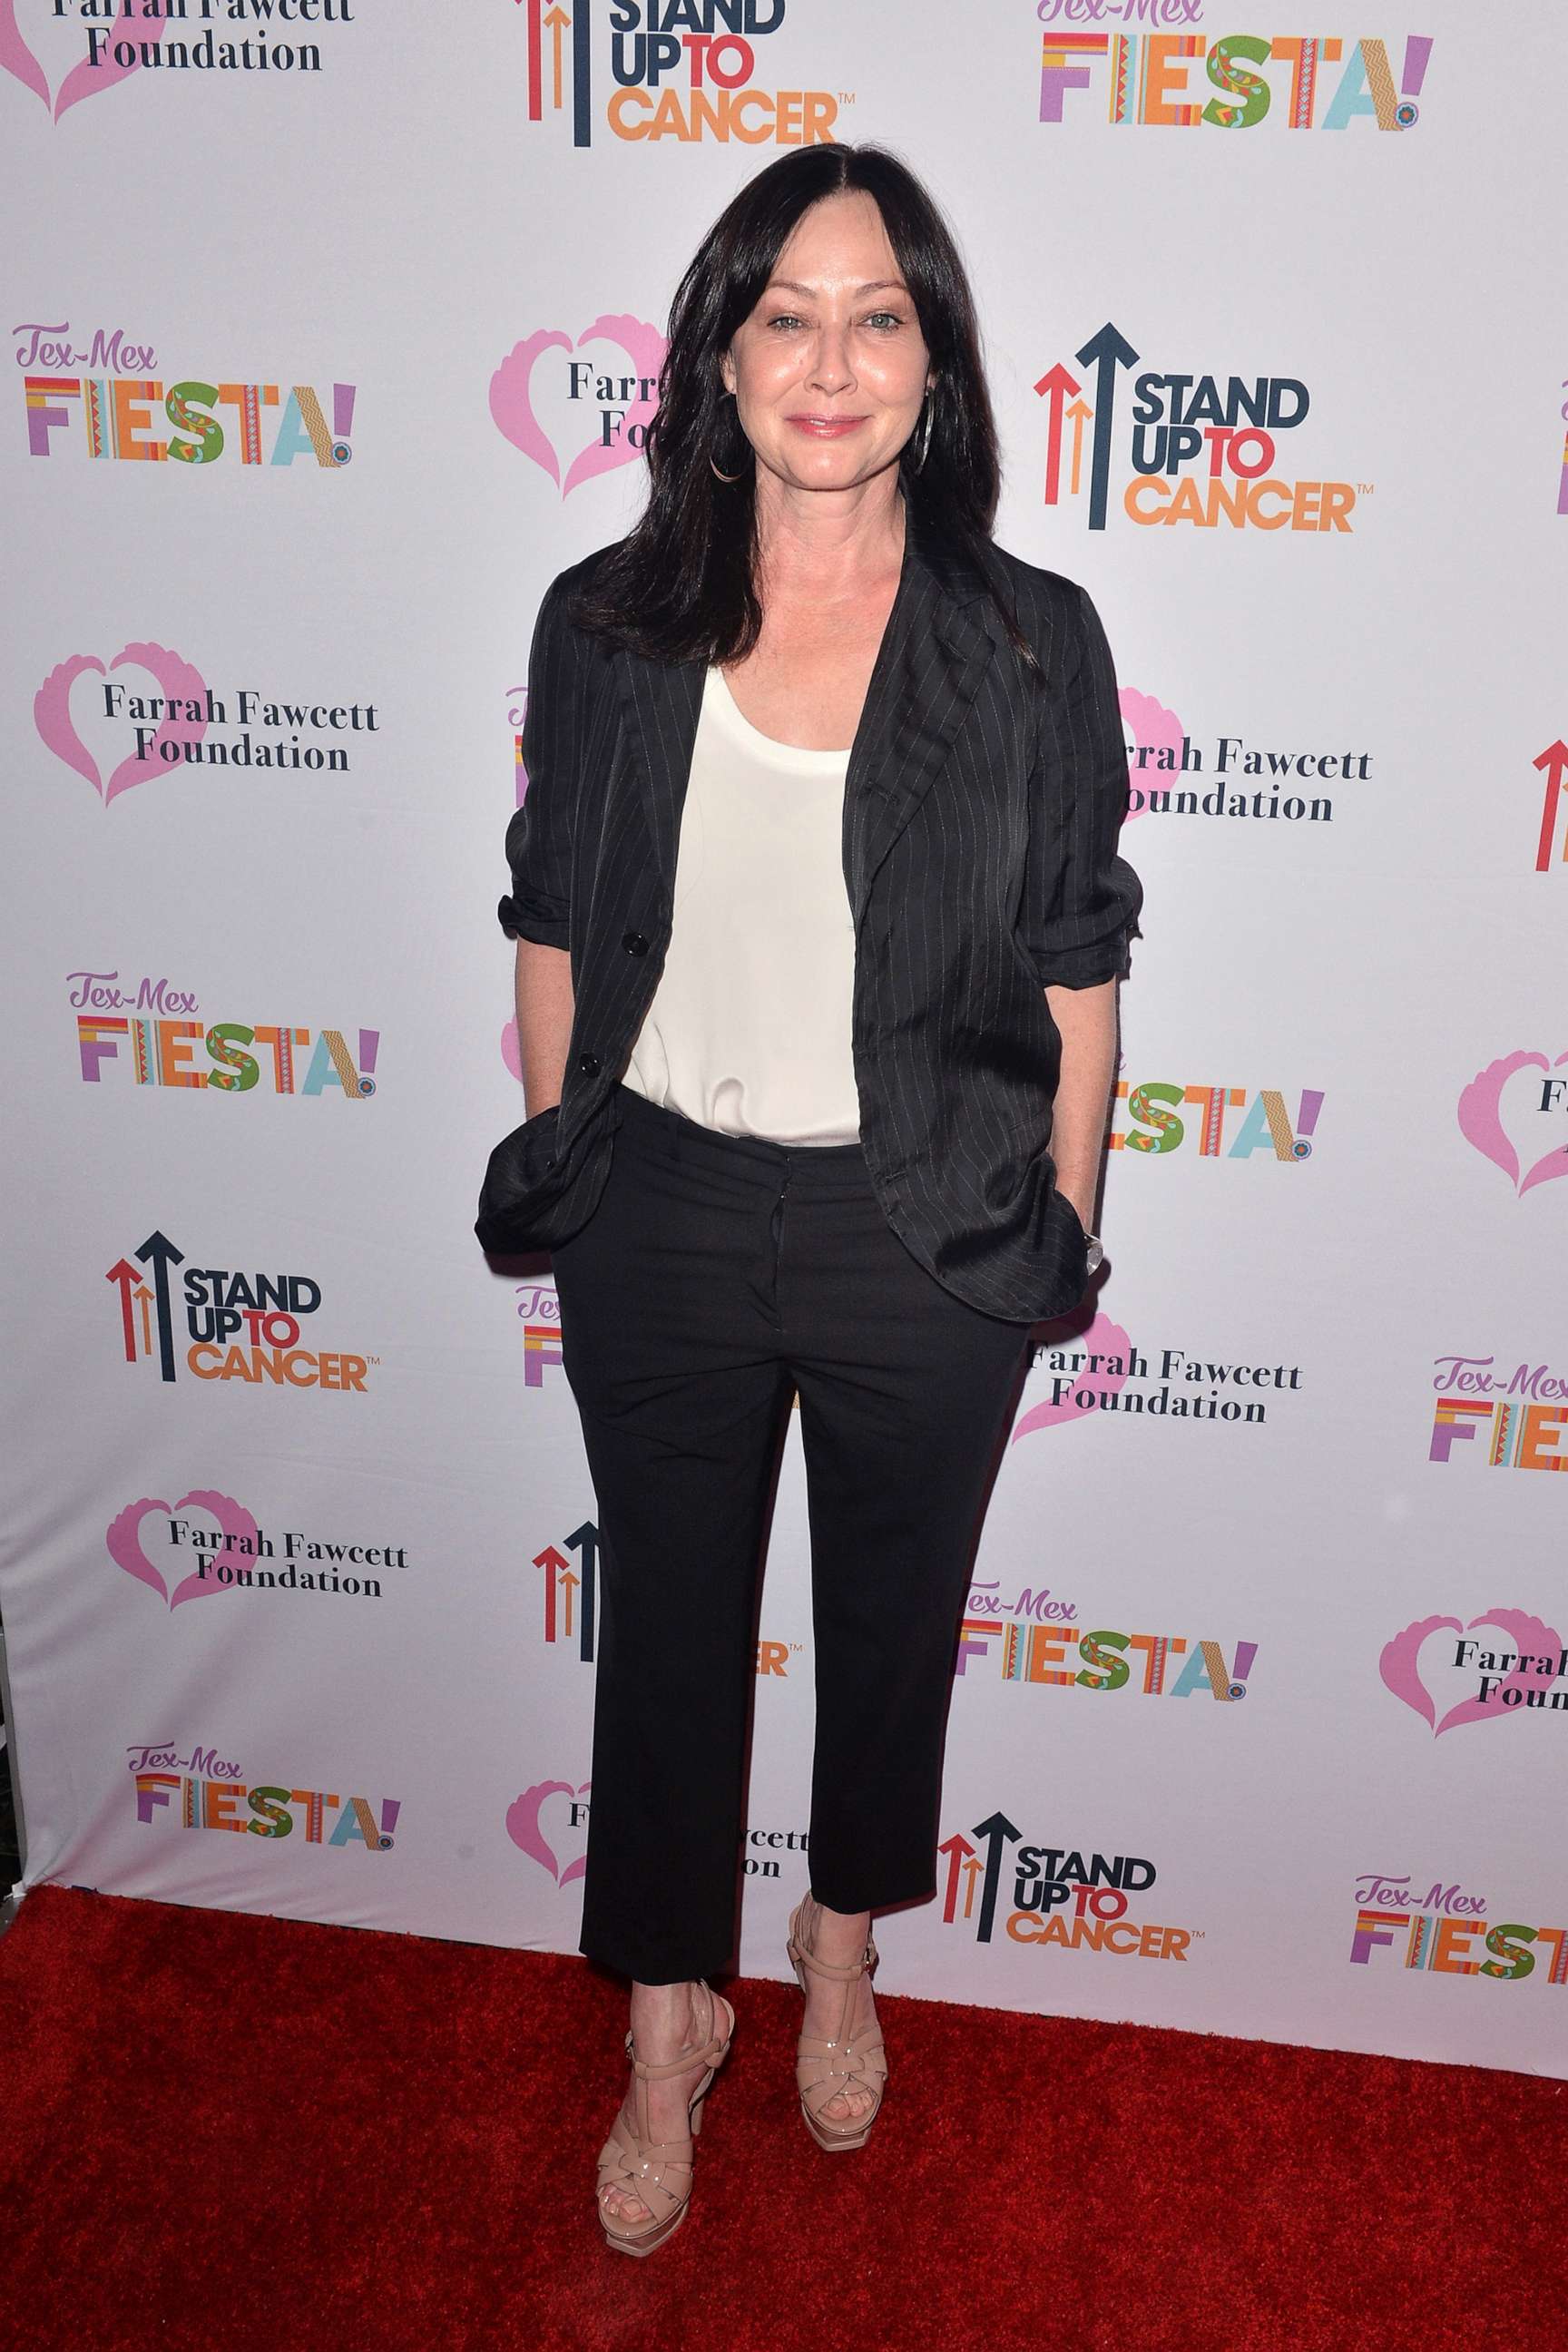 PHOTO: Shannen Doherty arrives for an event on Sept. 6, 2019, in Beverly Hills, Calif.